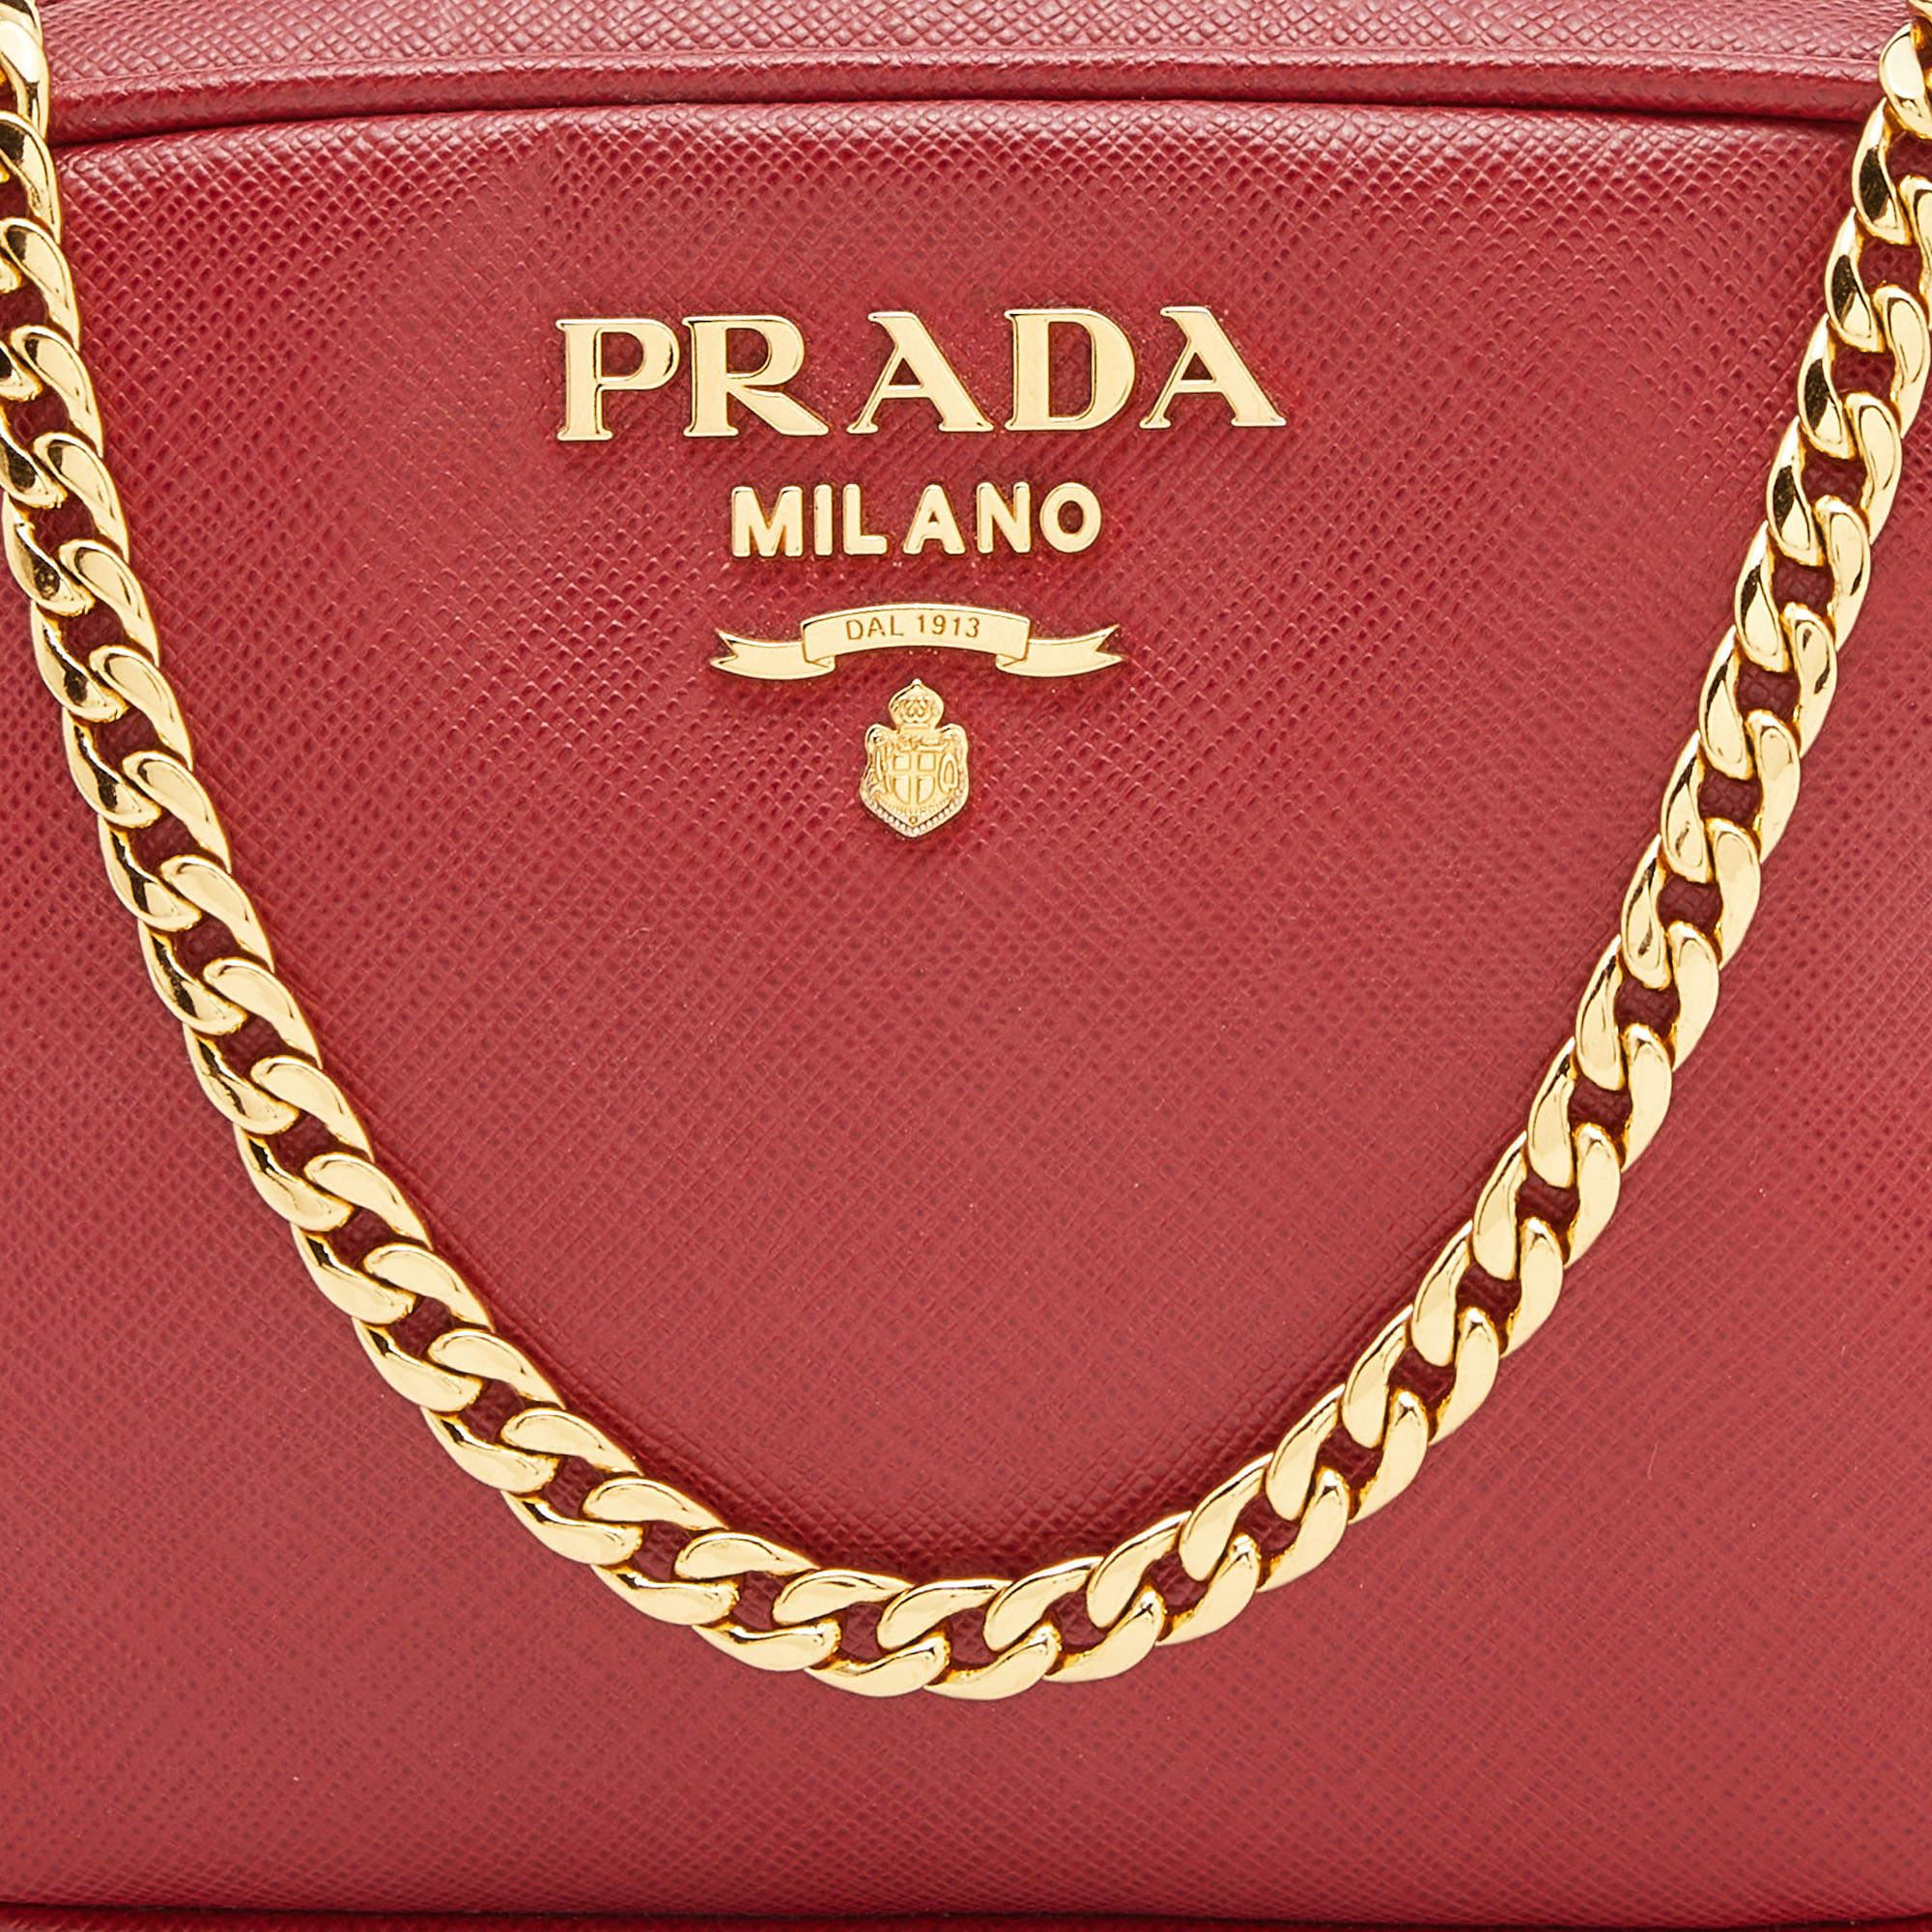 Prada Red Saffiano Lux Leather Convertible Chain Belt Bag 5